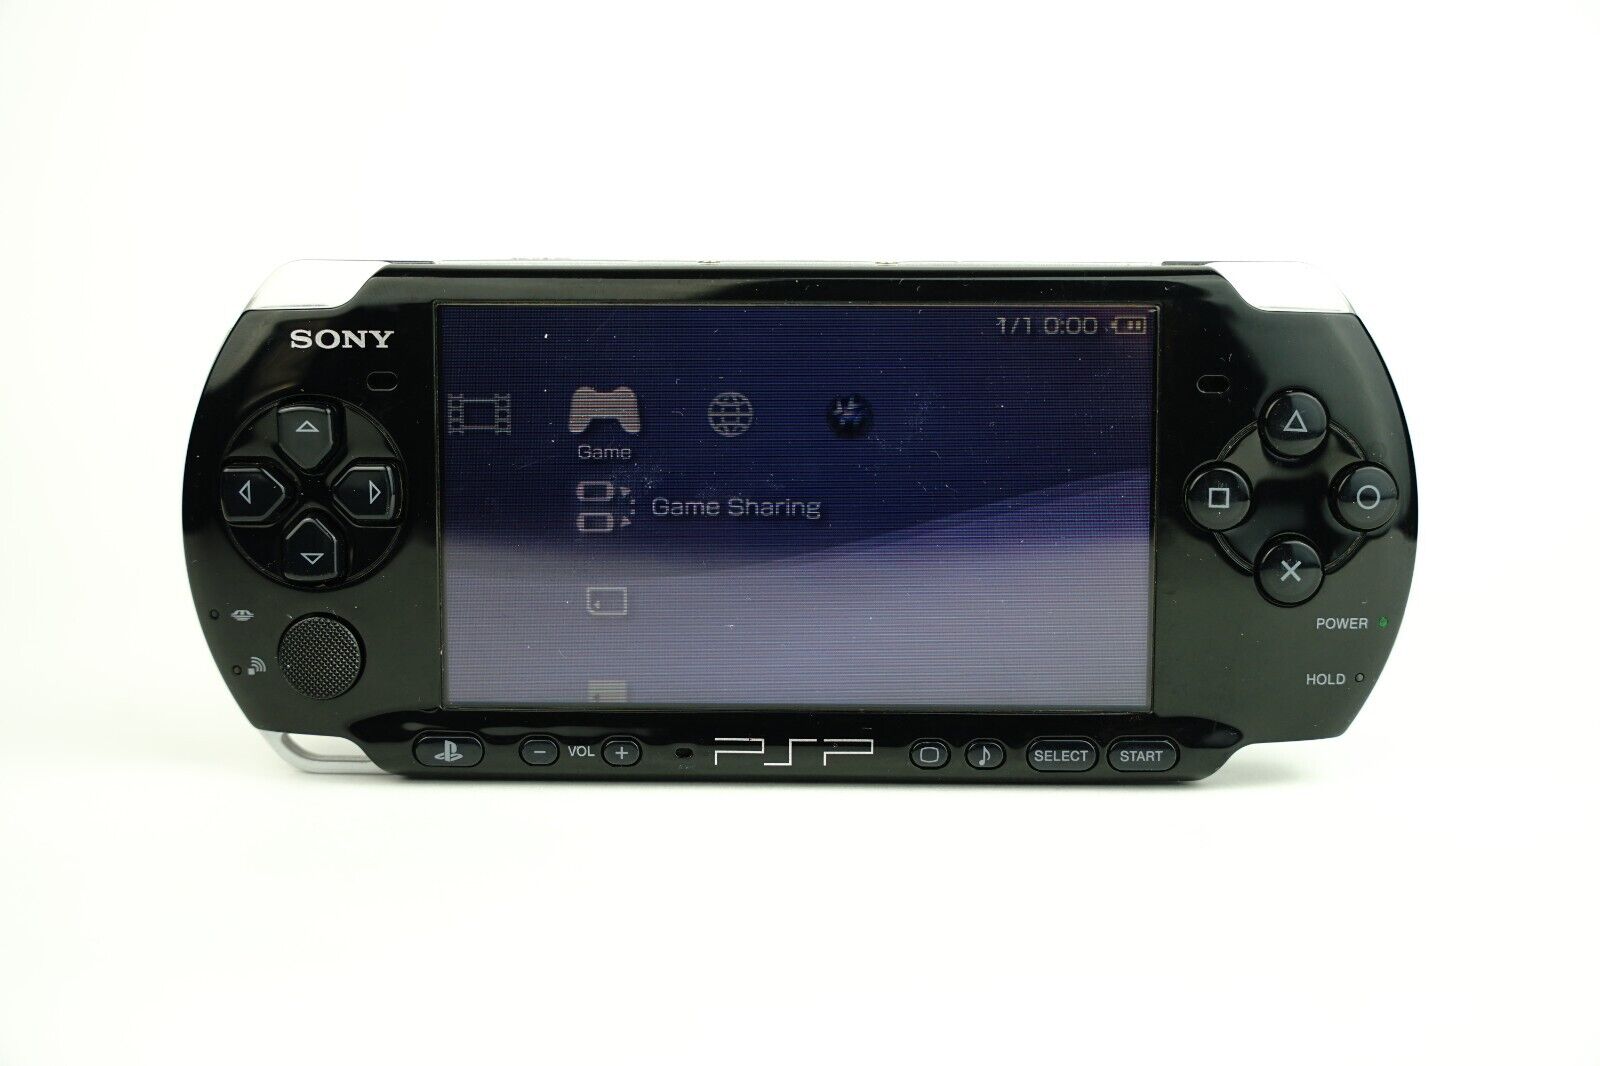 Sony PlayStation PSP 1000/2000/3000 Console with Charger/New Battery Region Free